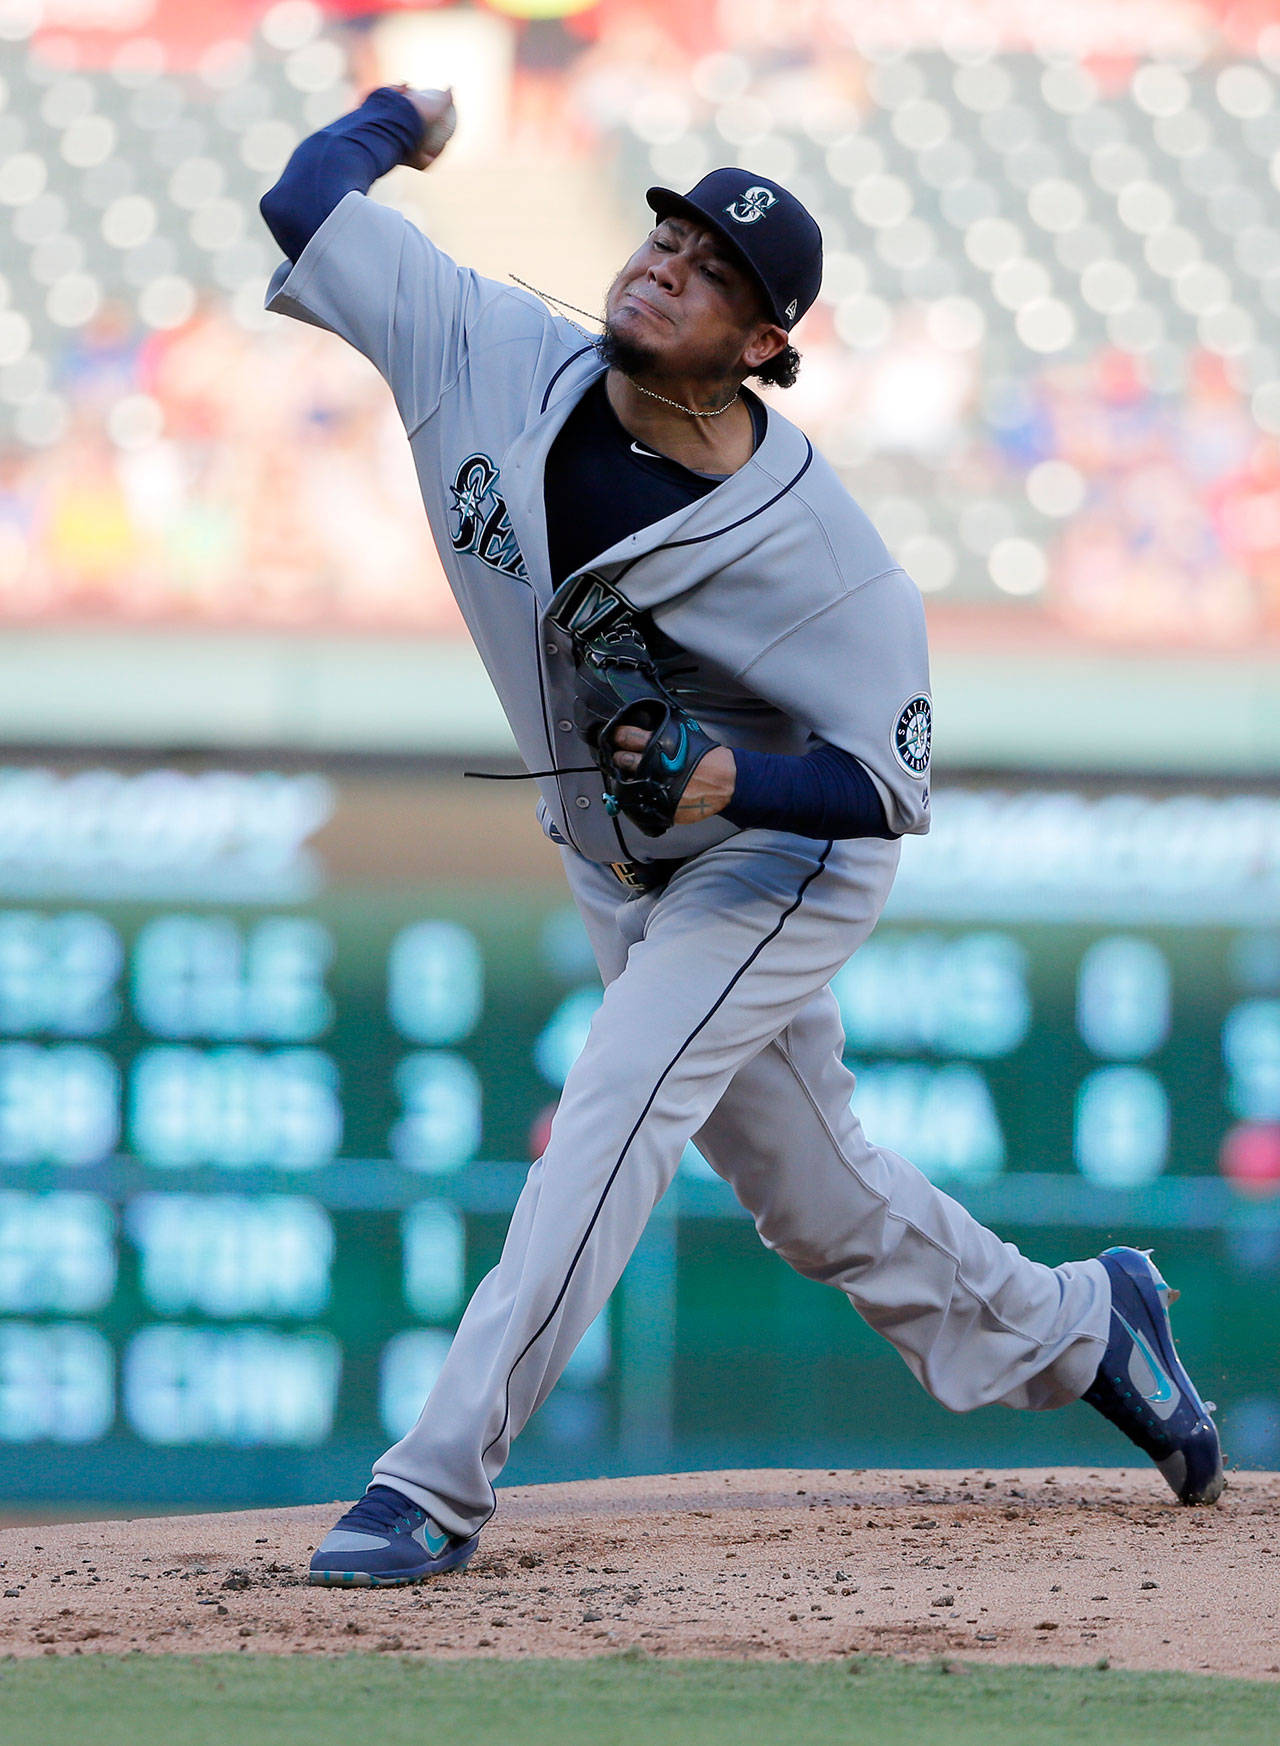 Seattle’s Felix Hernandez throws a pitch in the first inning of a July 31 game in Arlington, Texas. (AP Photo/Tony Gutierrez)